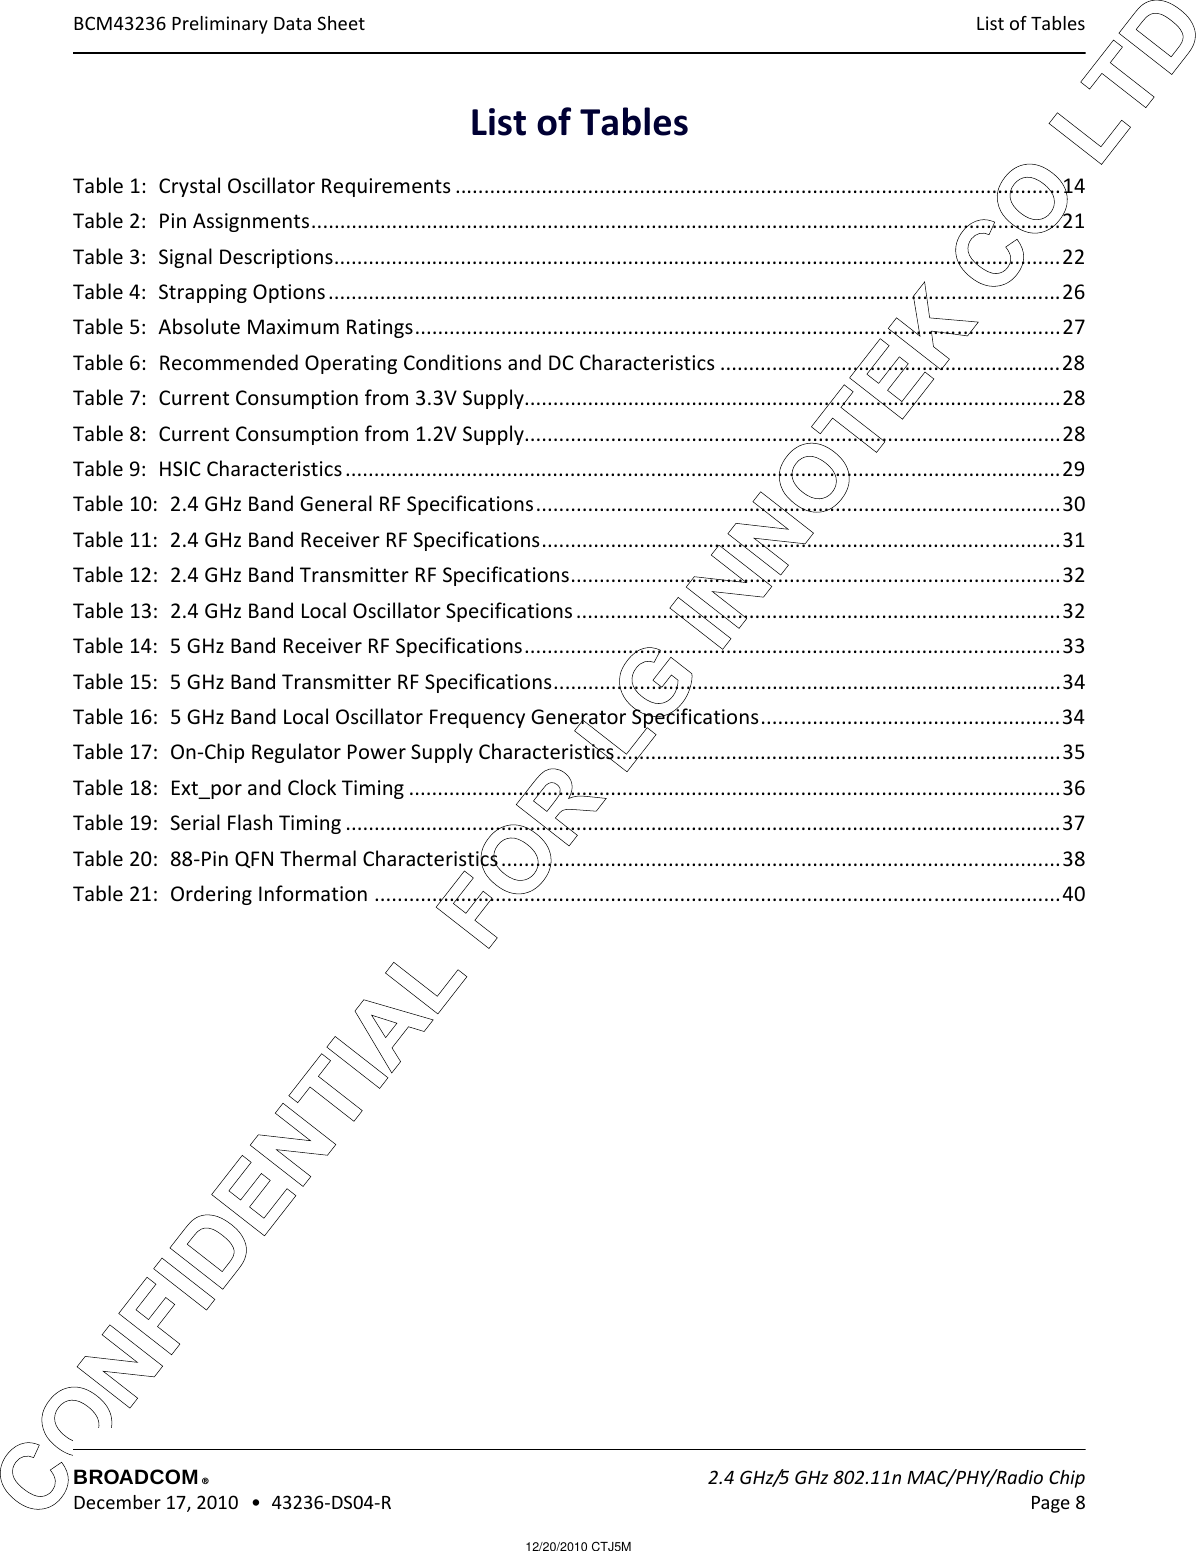 12/20/2010 CTJ5MCONFIDENTIAL FOR LG INNOTEK CO LTD List of Tables BCM43236 Preliminary Data SheetBROADCOM    2.4 GHz/5 GHz 802.11n MAC/PHY/Radio Chip December 17, 2010   •  43236-DS04-R Page 8®List of TablesTable 1:  Crystal Oscillator Requirements .........................................................................................................14Table 2:  Pin Assignments..................................................................................................................................21Table 3:  Signal Descriptions..............................................................................................................................22Table 4:  Strapping Options...............................................................................................................................26Table 5:  Absolute Maximum Ratings................................................................................................................27Table 6:  Recommended Operating Conditions and DC Characteristics ...........................................................28Table 7:  Current Consumption from 3.3V Supply.............................................................................................28Table 8:  Current Consumption from 1.2V Supply.............................................................................................28Table 9:  HSIC Characteristics............................................................................................................................29Table 10:  2.4 GHz Band General RF Specifications...........................................................................................30Table 11:  2.4 GHz Band Receiver RF Specifications..........................................................................................31Table 12:  2.4 GHz Band Transmitter RF Specifications.....................................................................................32Table 13:  2.4 GHz Band Local Oscillator Specifications ....................................................................................32Table 14:  5 GHz Band Receiver RF Specifications.............................................................................................33Table 15:  5 GHz Band Transmitter RF Specifications........................................................................................34Table 16:  5 GHz Band Local Oscillator Frequency Generator Specifications....................................................34Table 17:  On-Chip Regulator Power Supply Characteristics.............................................................................35Table 18:  Ext_por and Clock Timing .................................................................................................................36Table 19:  Serial Flash Timing ............................................................................................................................37Table 20:  88-Pin QFN Thermal Characteristics.................................................................................................38Table 21:  Ordering Information .......................................................................................................................40